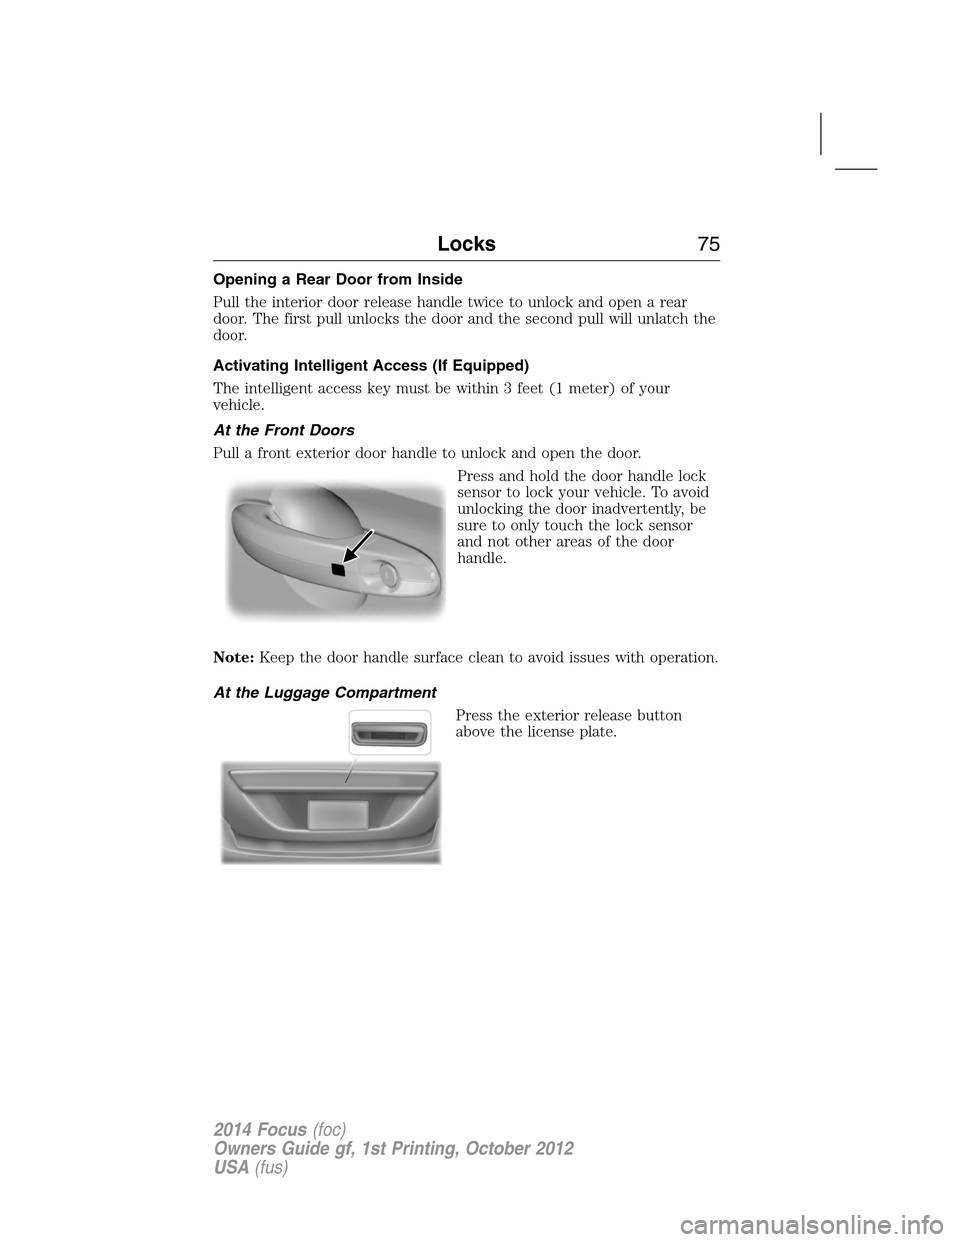 FORD FOCUS 2014 3.G User Guide Opening a Rear Door from Inside
Pull the interior door release handle twice to unlock and open a rear
door. The first pull unlocks the door and the second pull will unlatch the
door.
Activating Intell